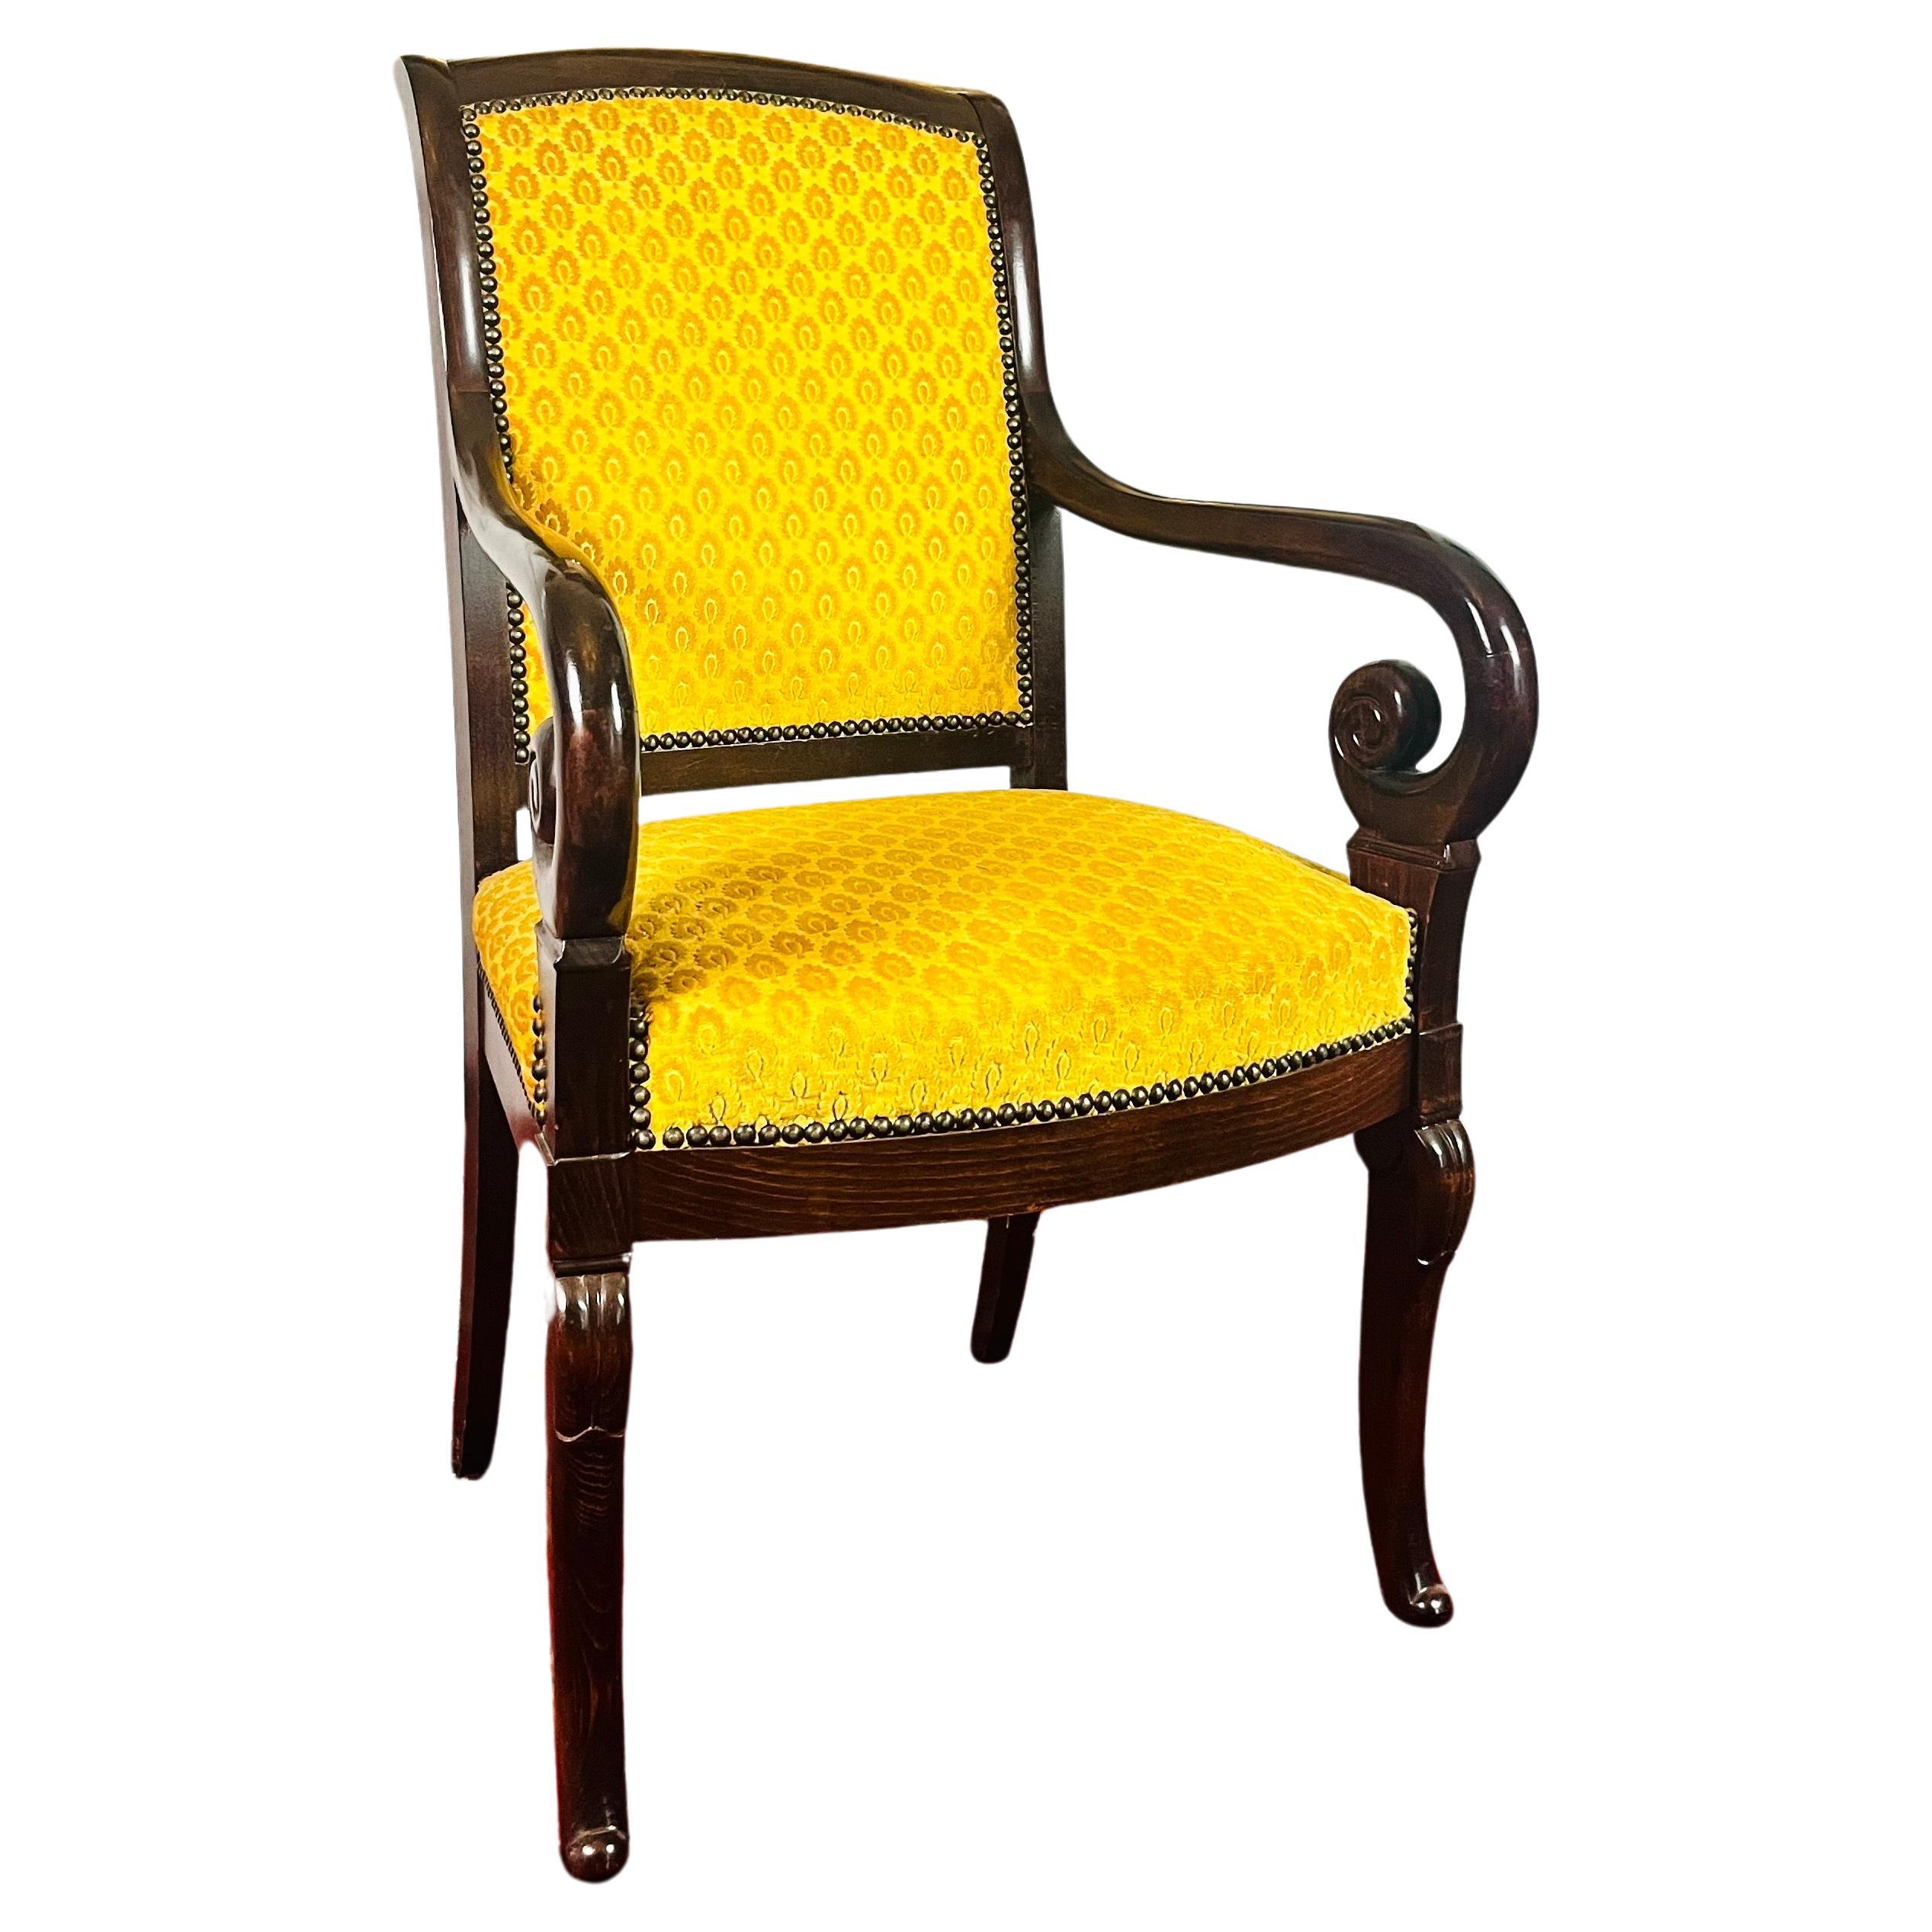 French Carved Wooden Armchair with Yellow Velvet   - Early 19th Century - France